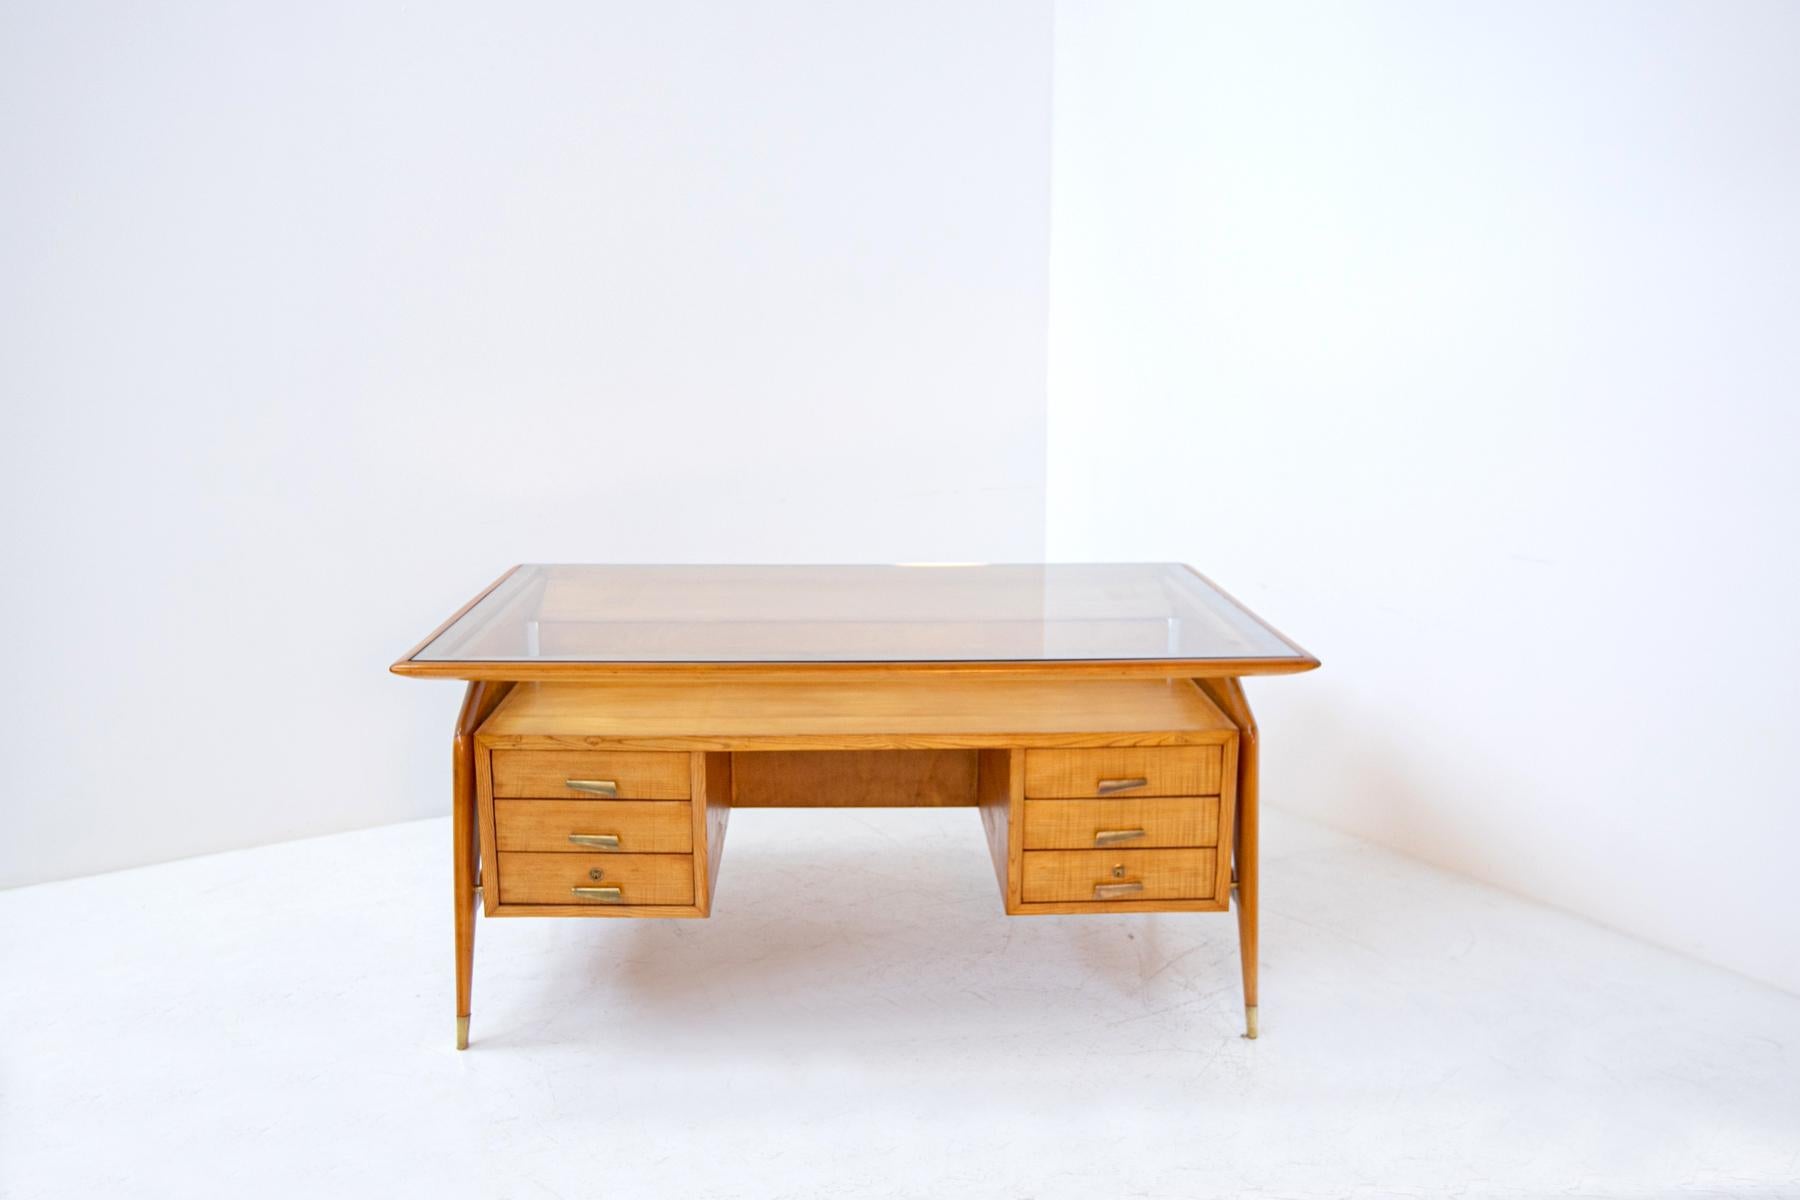 Carlo de Carli Important Desk in Wood Glass and Brass, 1950s Published 7